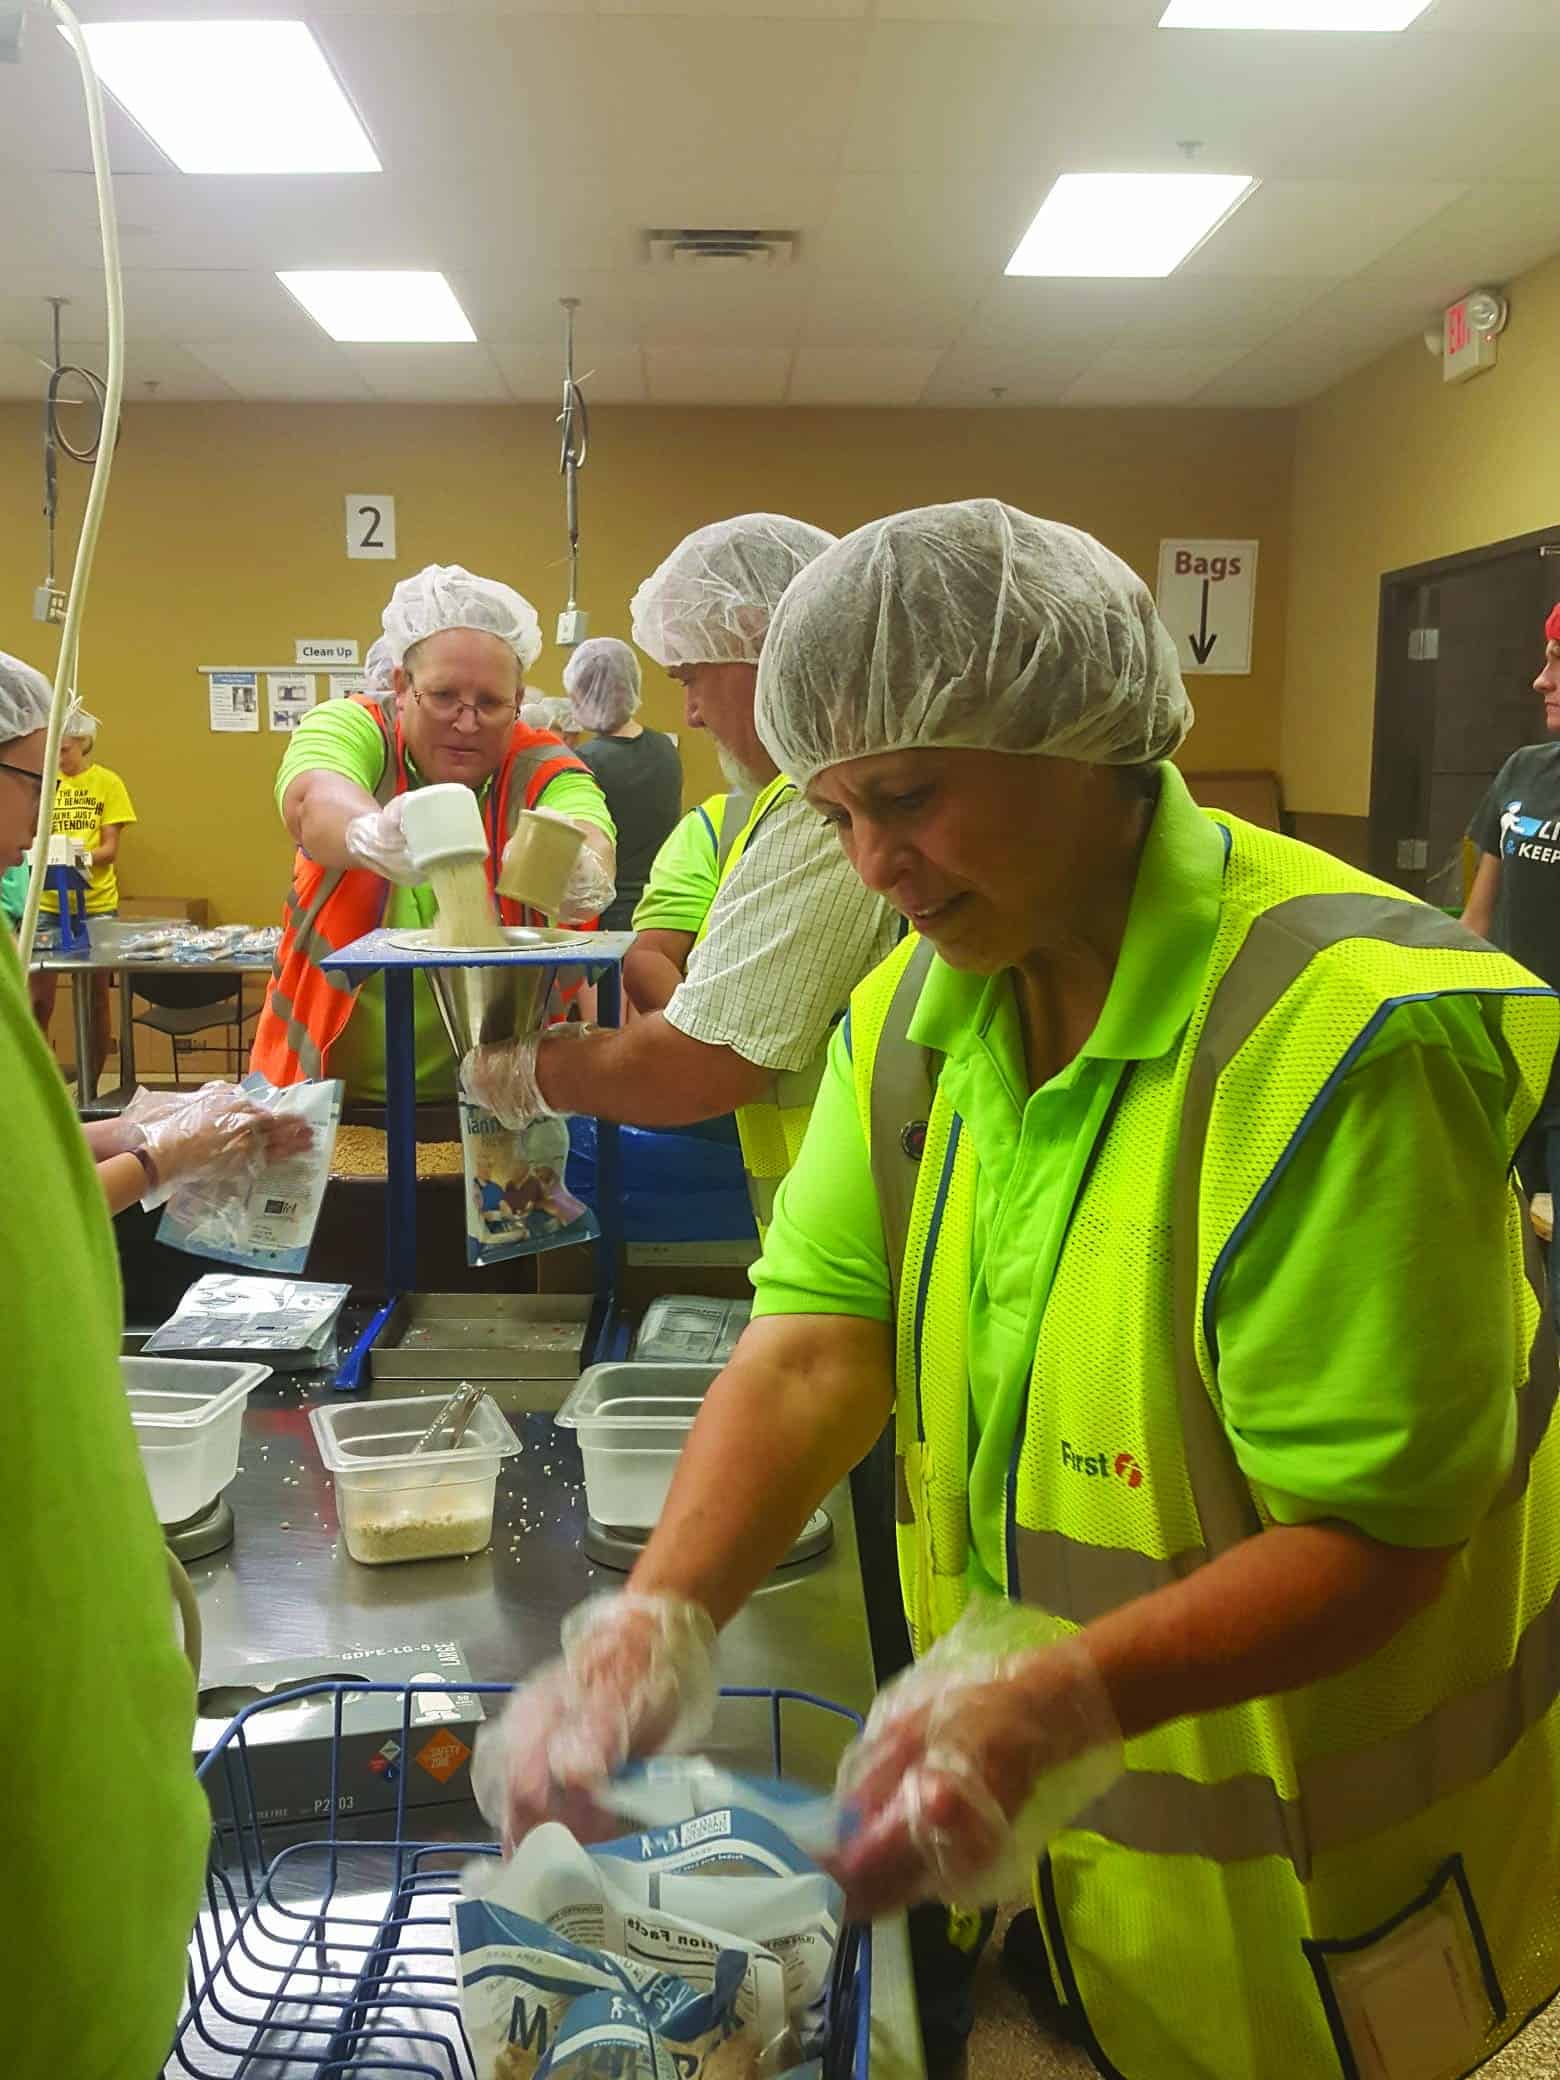 Location packs meals for those in need